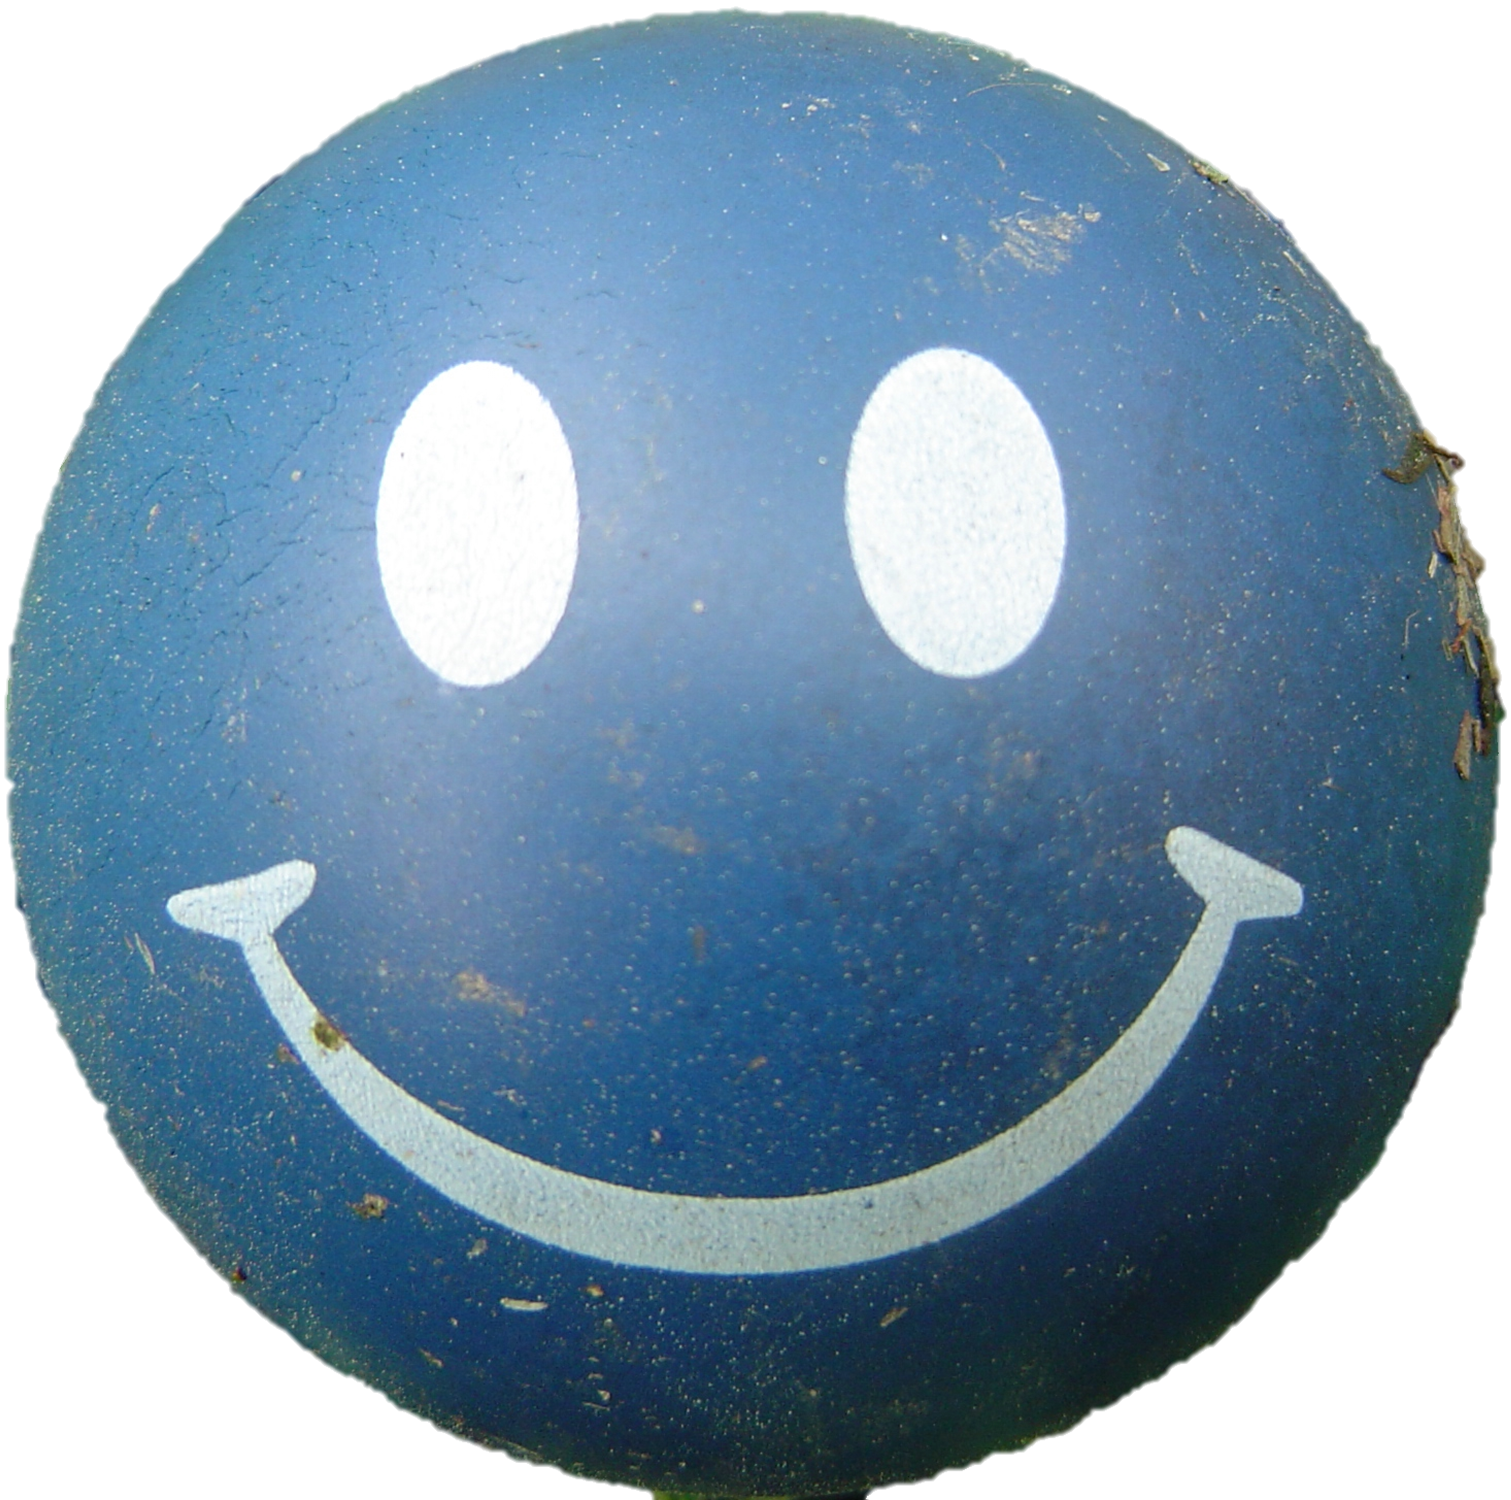 Miscellaneous Happy Face PNG